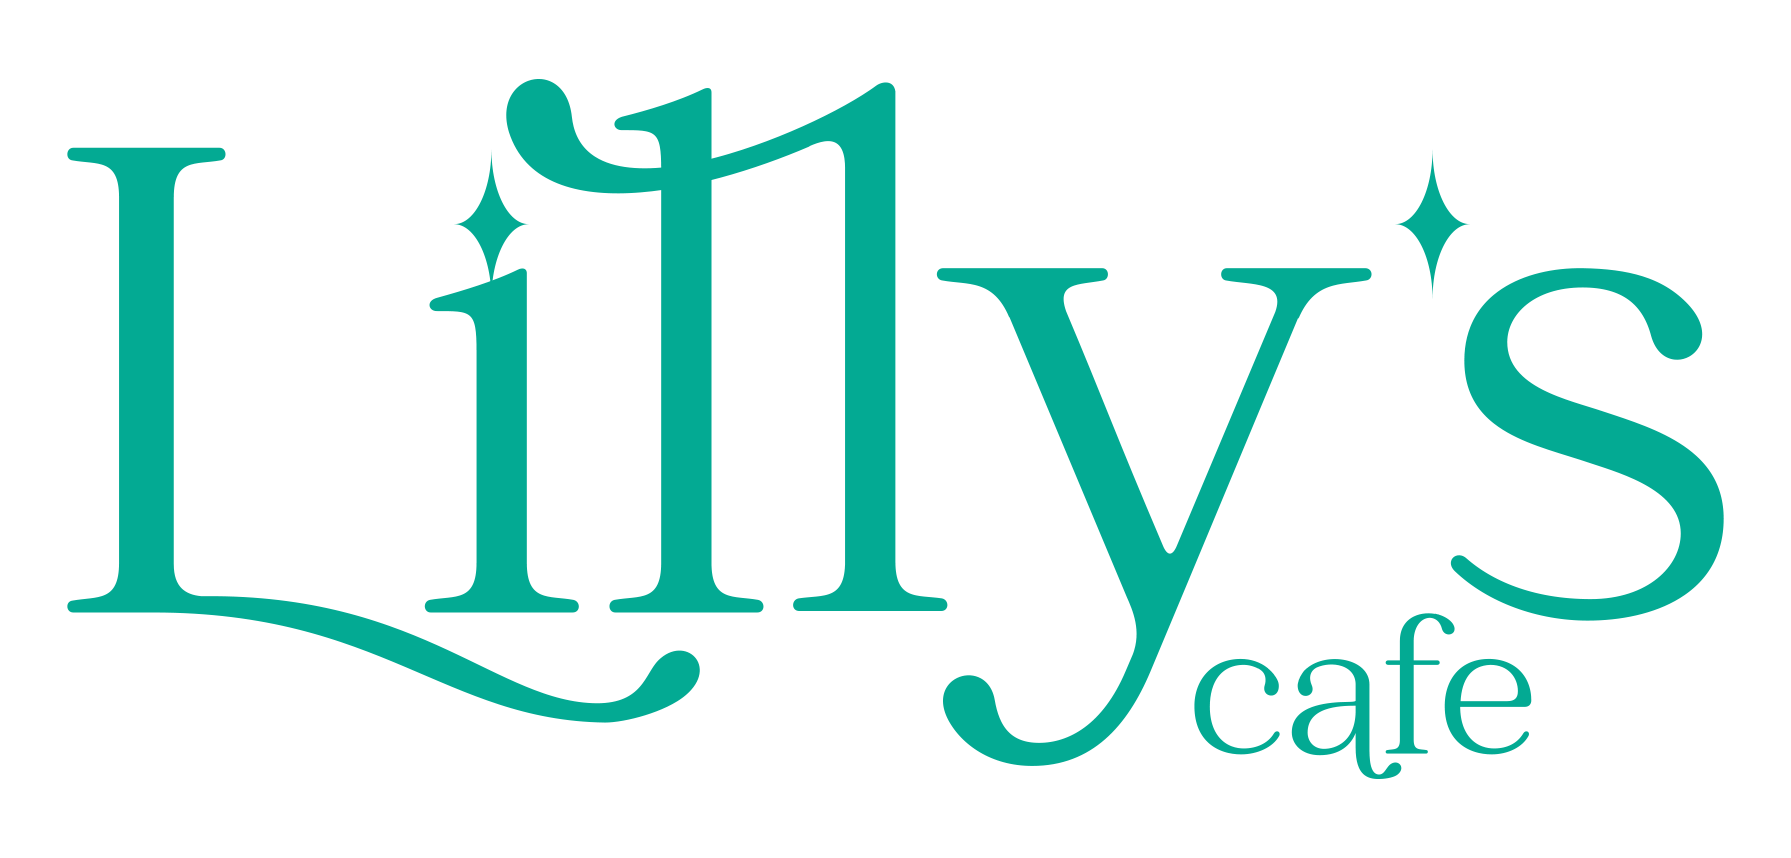 About us - Lilly's Cafe